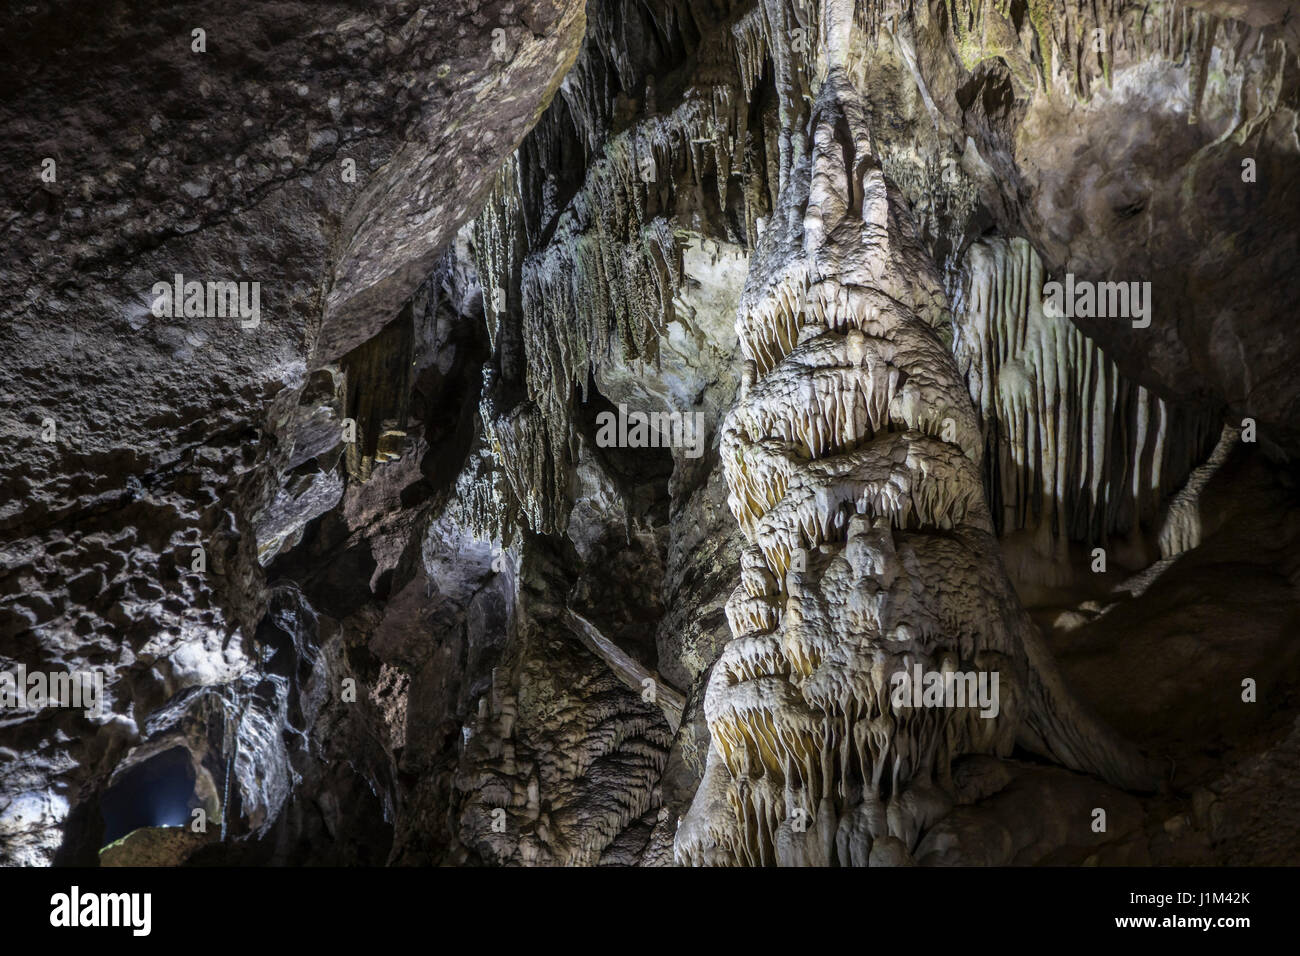 Stalactites, column and cave draperies suspended from ceiling in the Caves of Han-sur-Lesse / Grottes de Han, Belgian Ardennes, Belgium Stock Photo